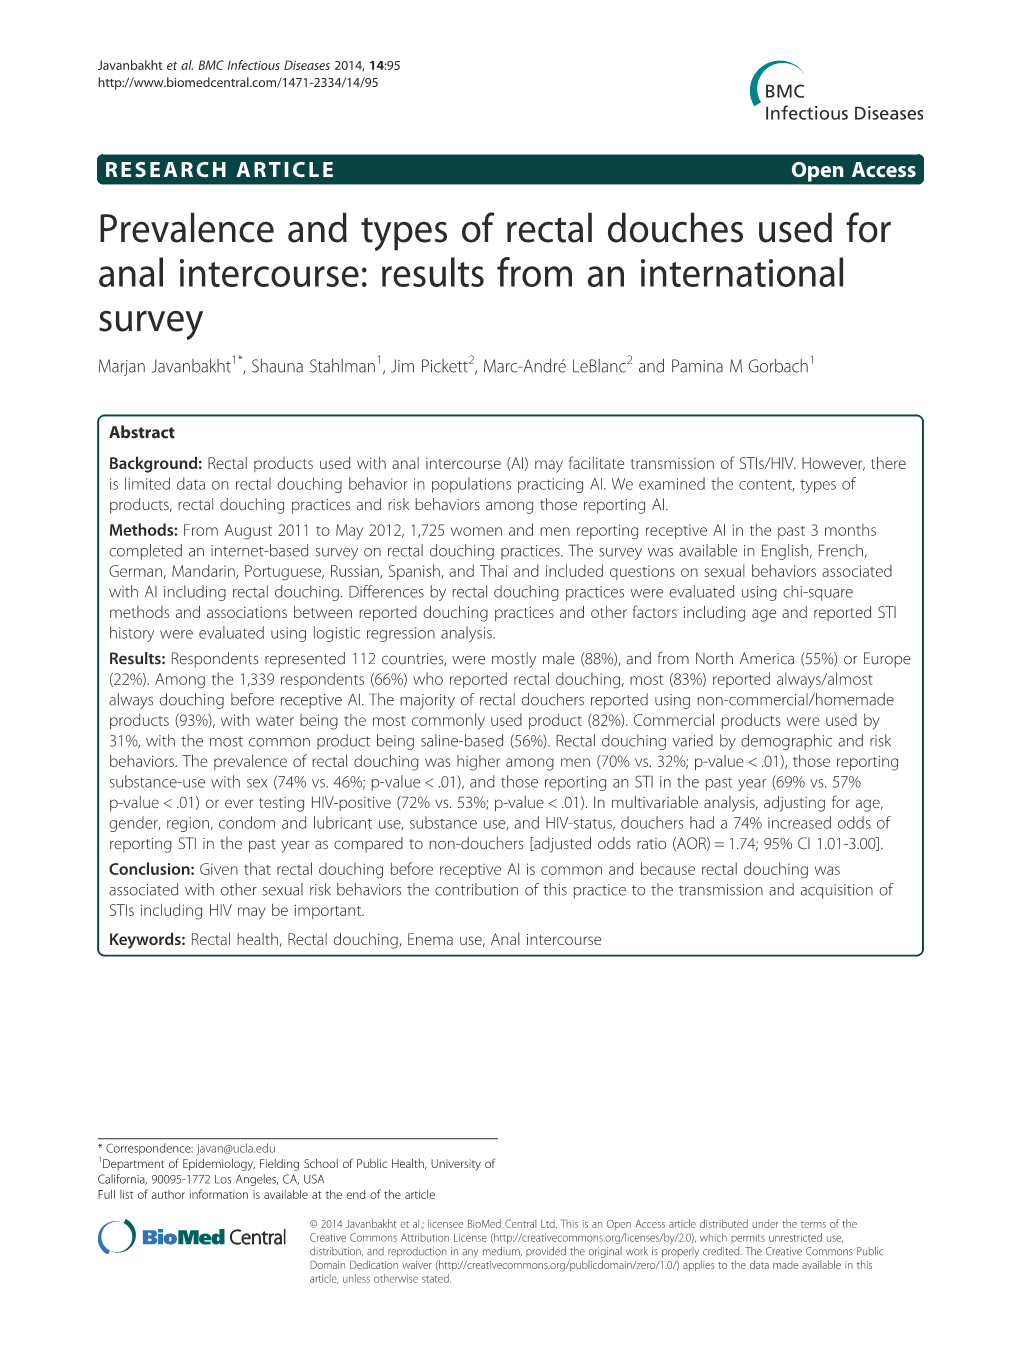 Prevalence and Types of Rectal Douches Used for Anal Intercourse